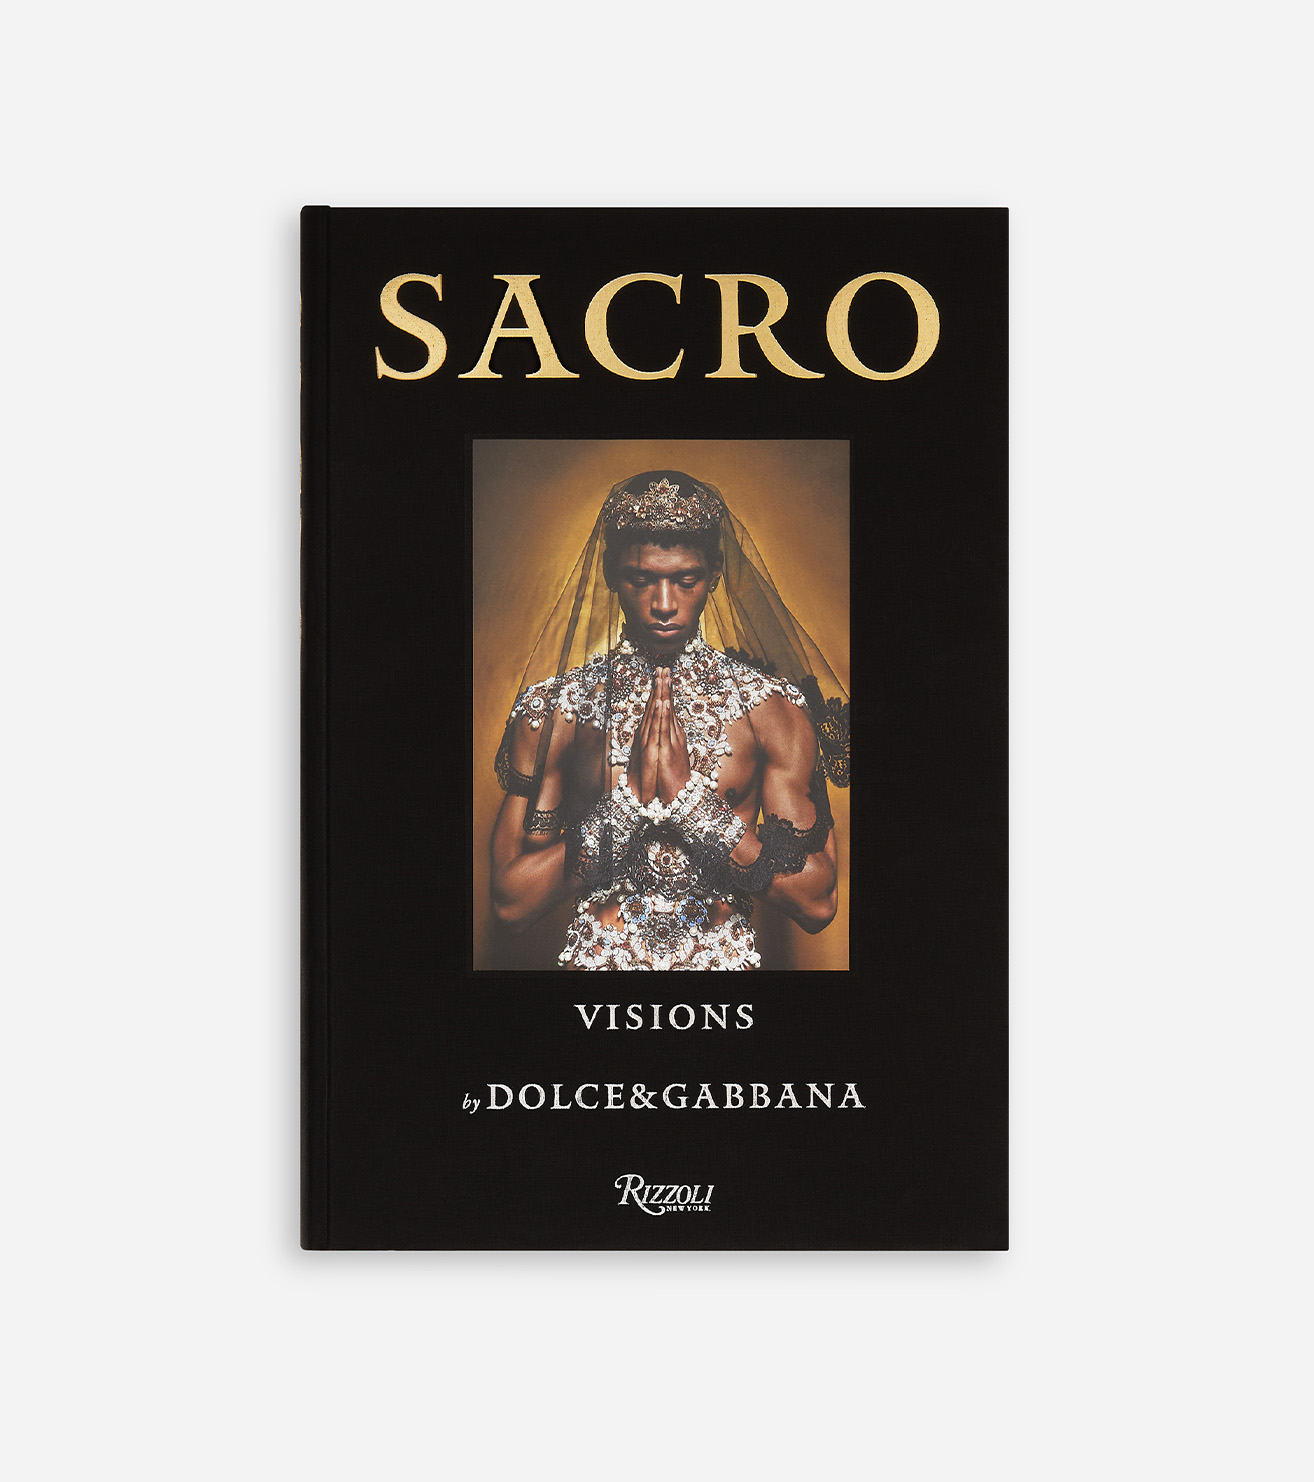 Sacro: Visions by Dolce&Gabbana, the book